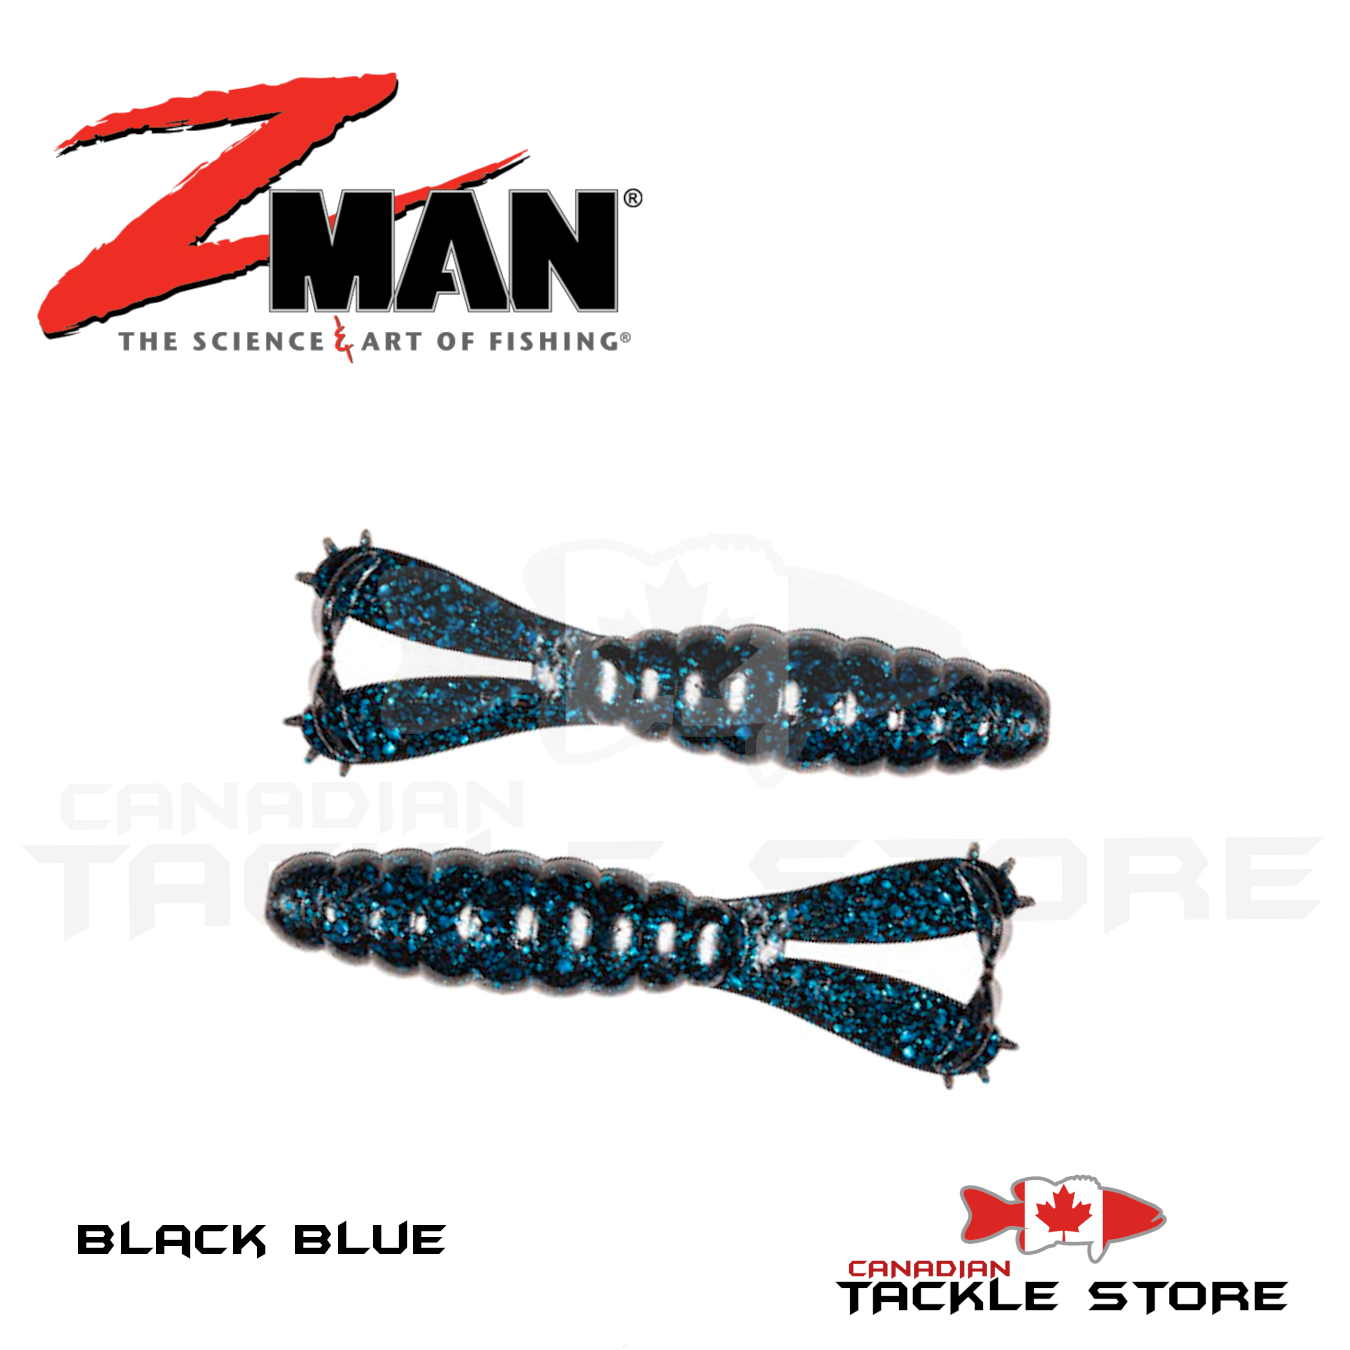 Z-Man Baby GOAT™ – Canadian Tackle Store